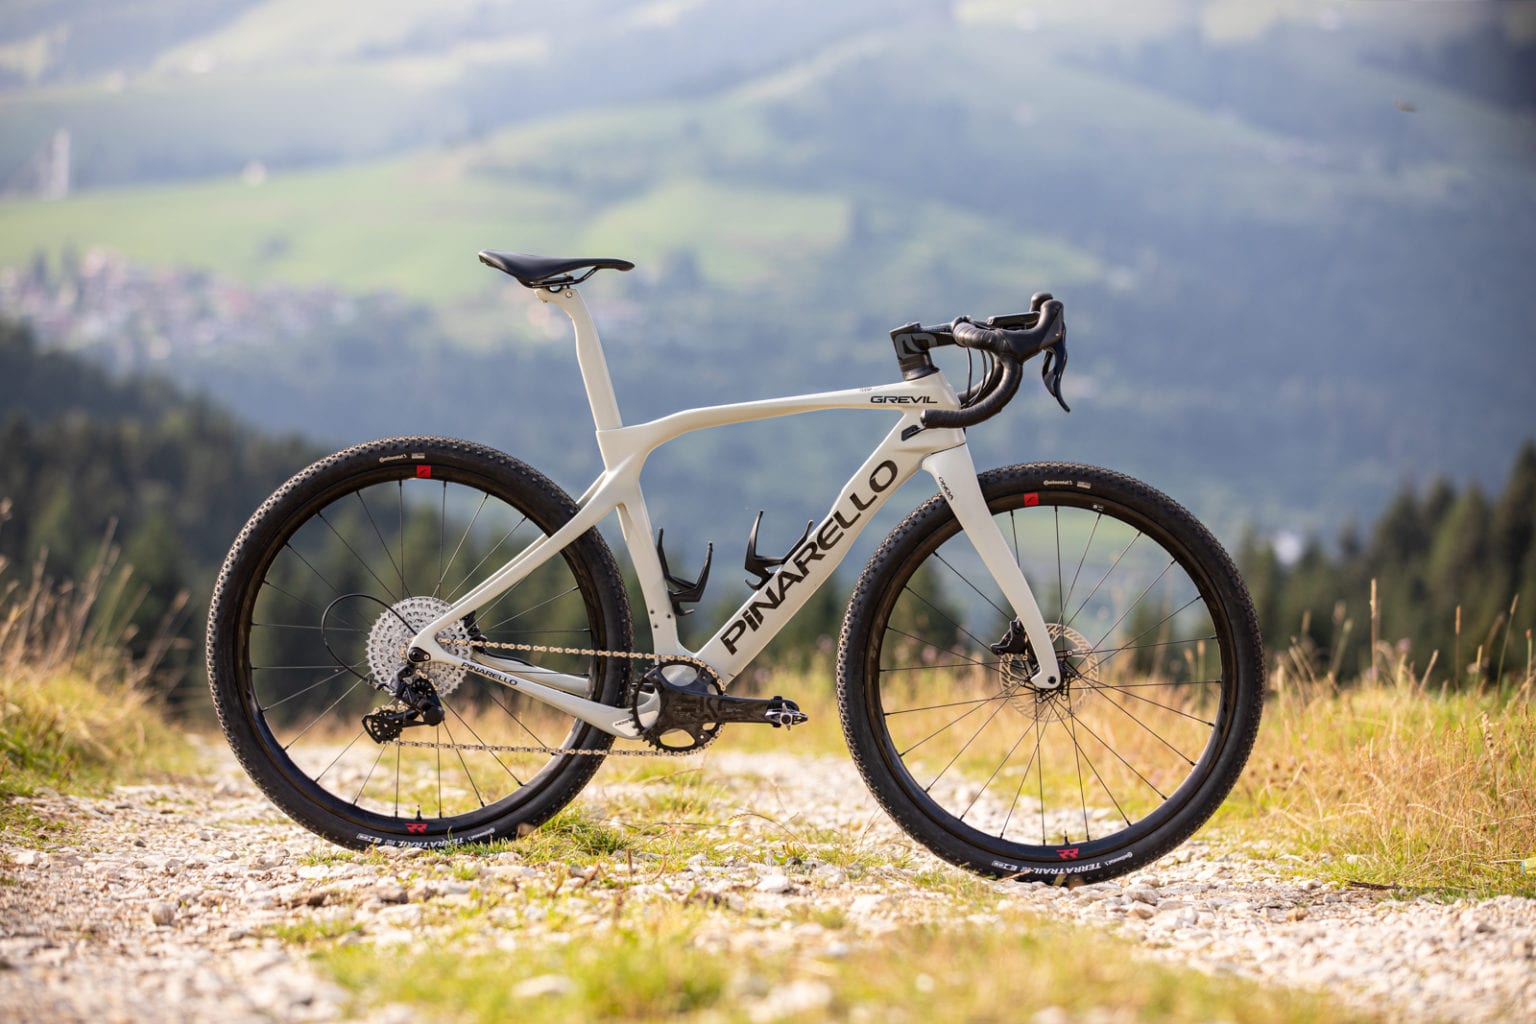 New Campagnolo Ekar gravel groupset: 7 key features you need to know